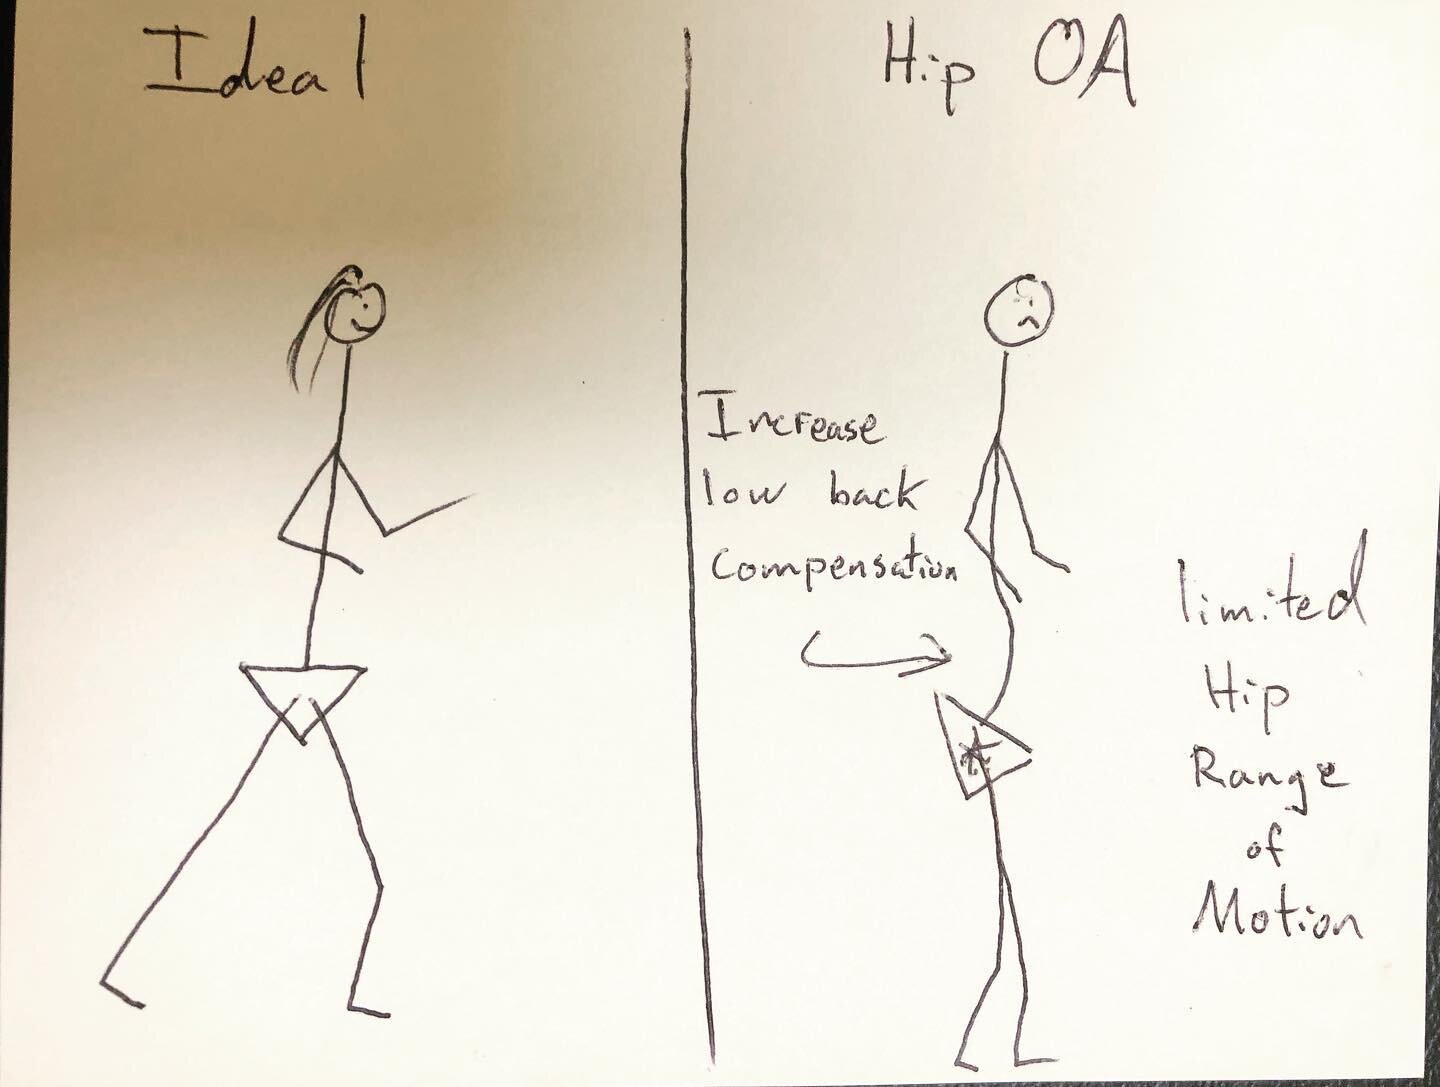 I get this question a lot from patients. &ldquo;Why could my back pain come from a hip problem?!?!&rdquo; 

Easy, allow my stick figure drawing to explain.

If your body cannot get the range of motion it needs from one joint, there&rsquo;s a good cha